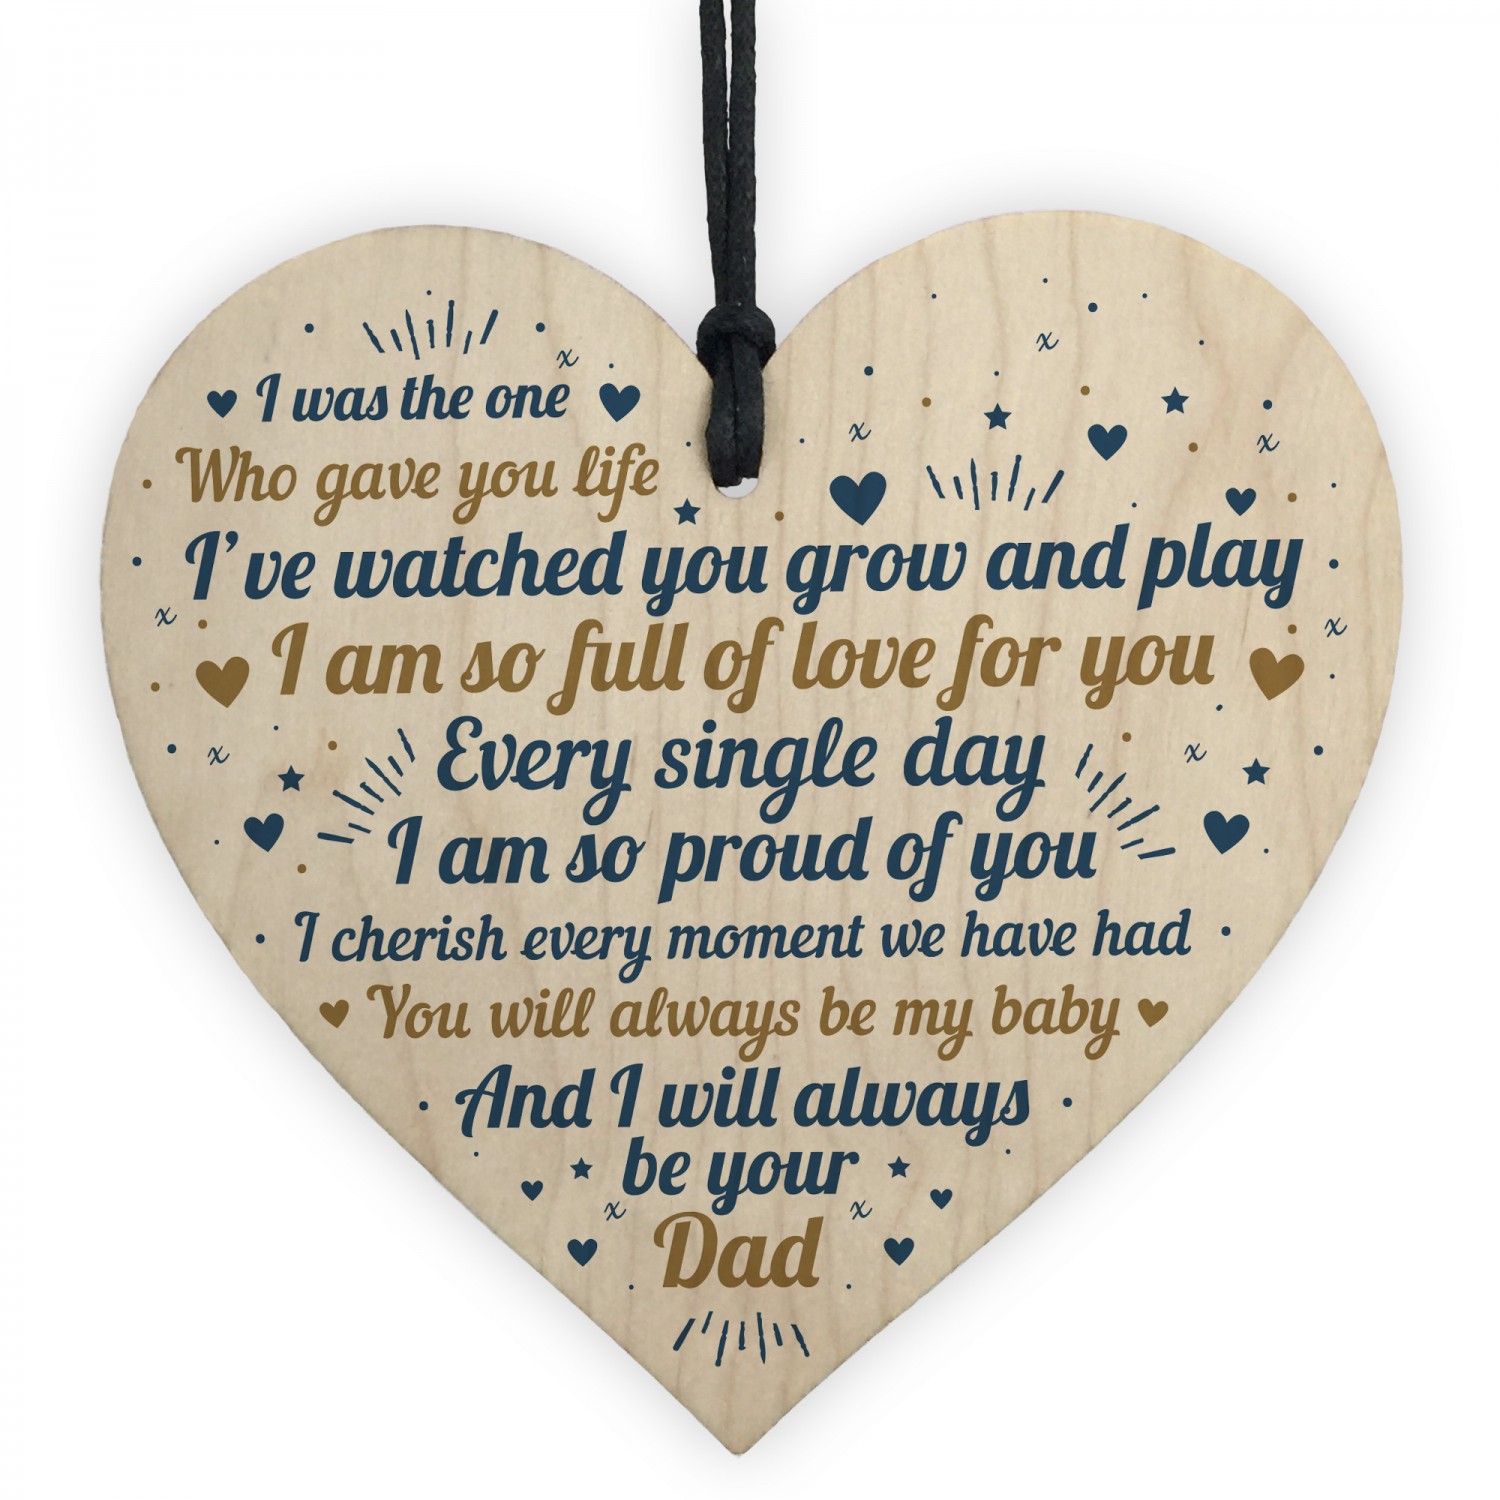 Handmade Daughter Son Gifts From Dad Wooden Heart Sign Keepsake